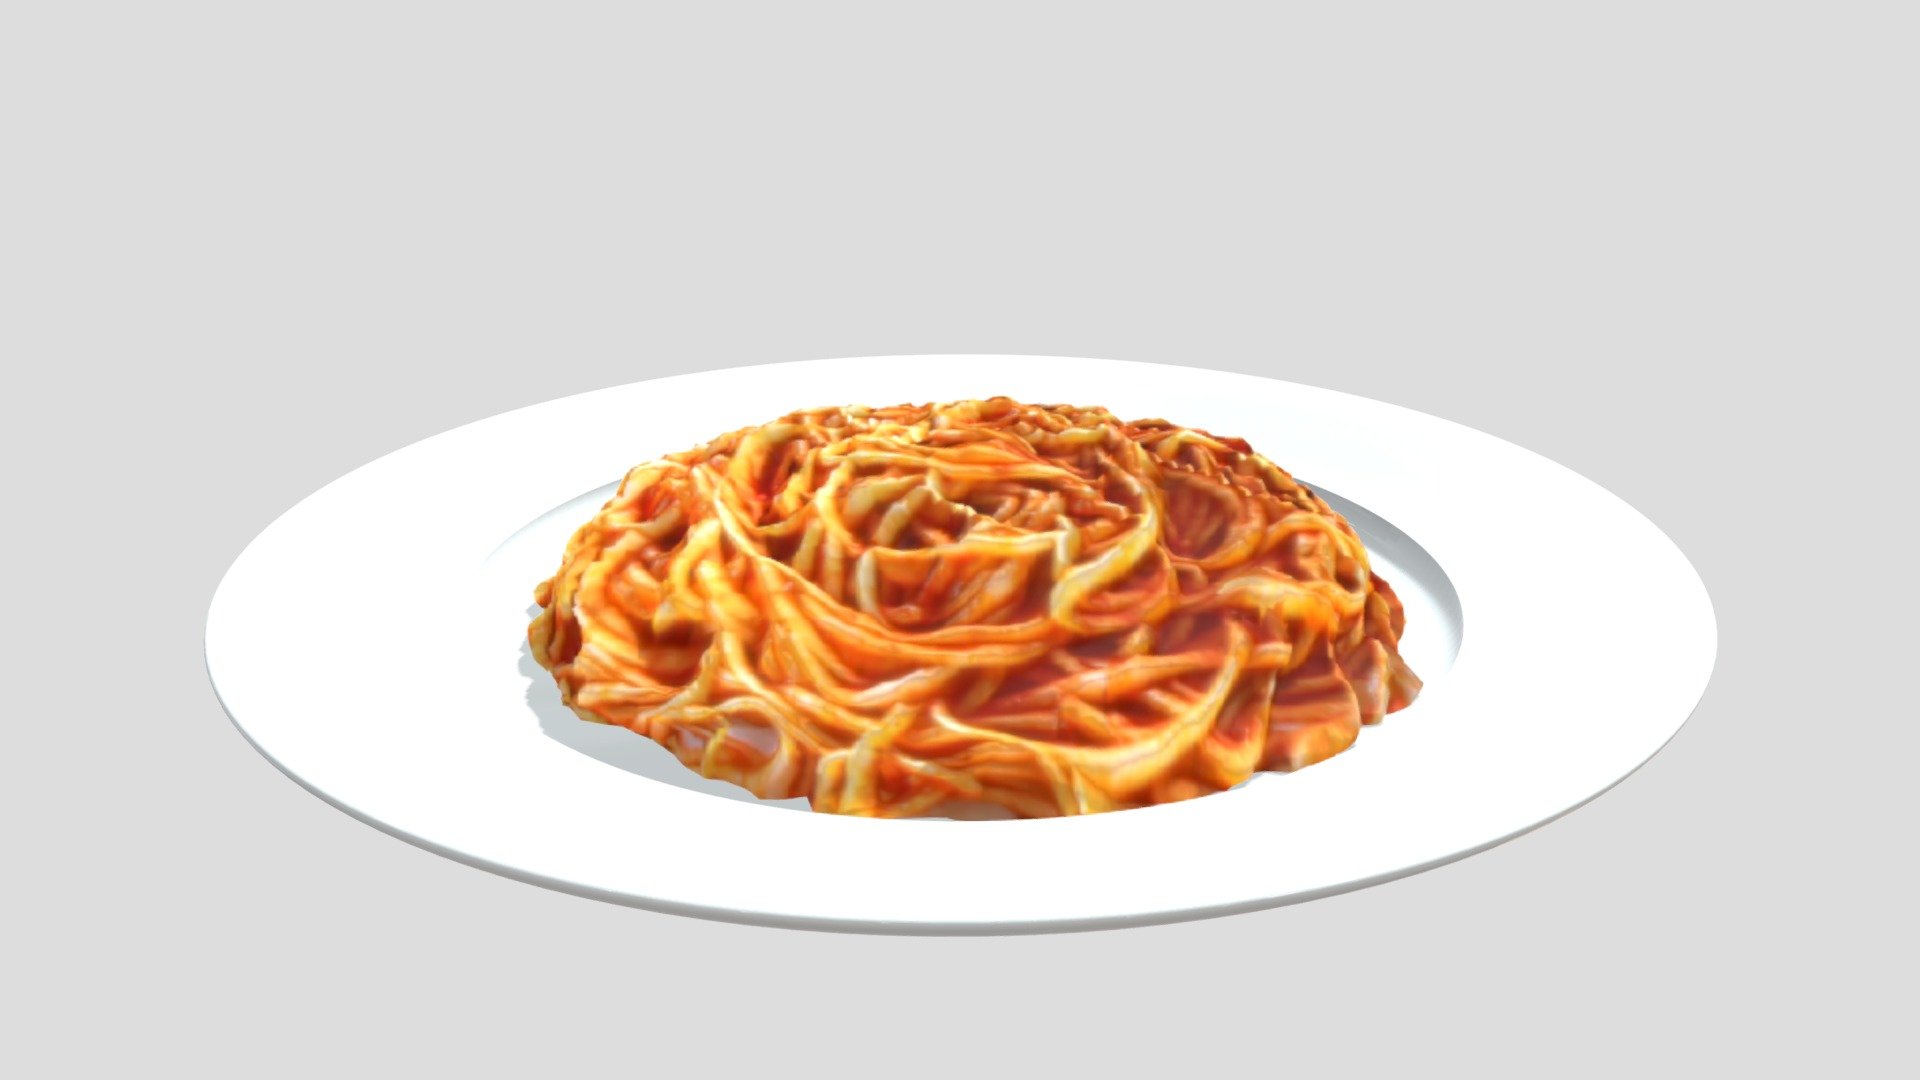 Spaghetti with tomato sauce  Height map experiment PBR - Spaghetti al pomodoro / pasta tomato sauce PBR - 3D model by usefulspunforsup (@noemyssima7) 3d model